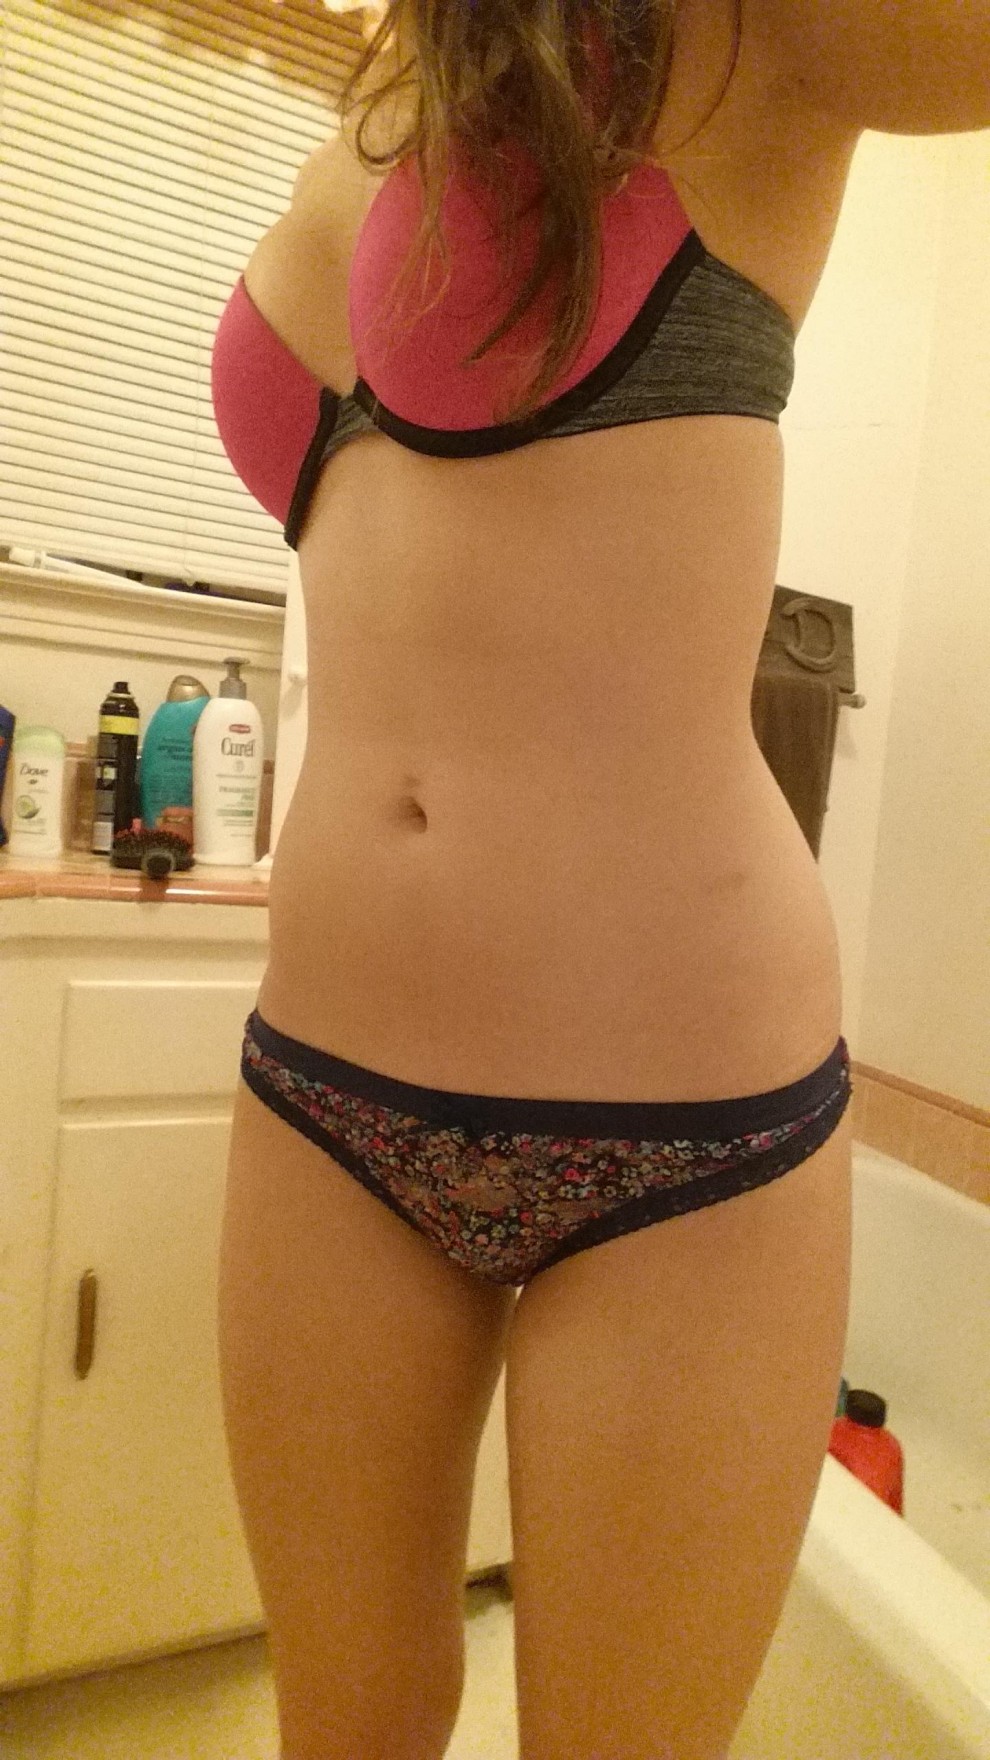 Suggestions (f)or next post